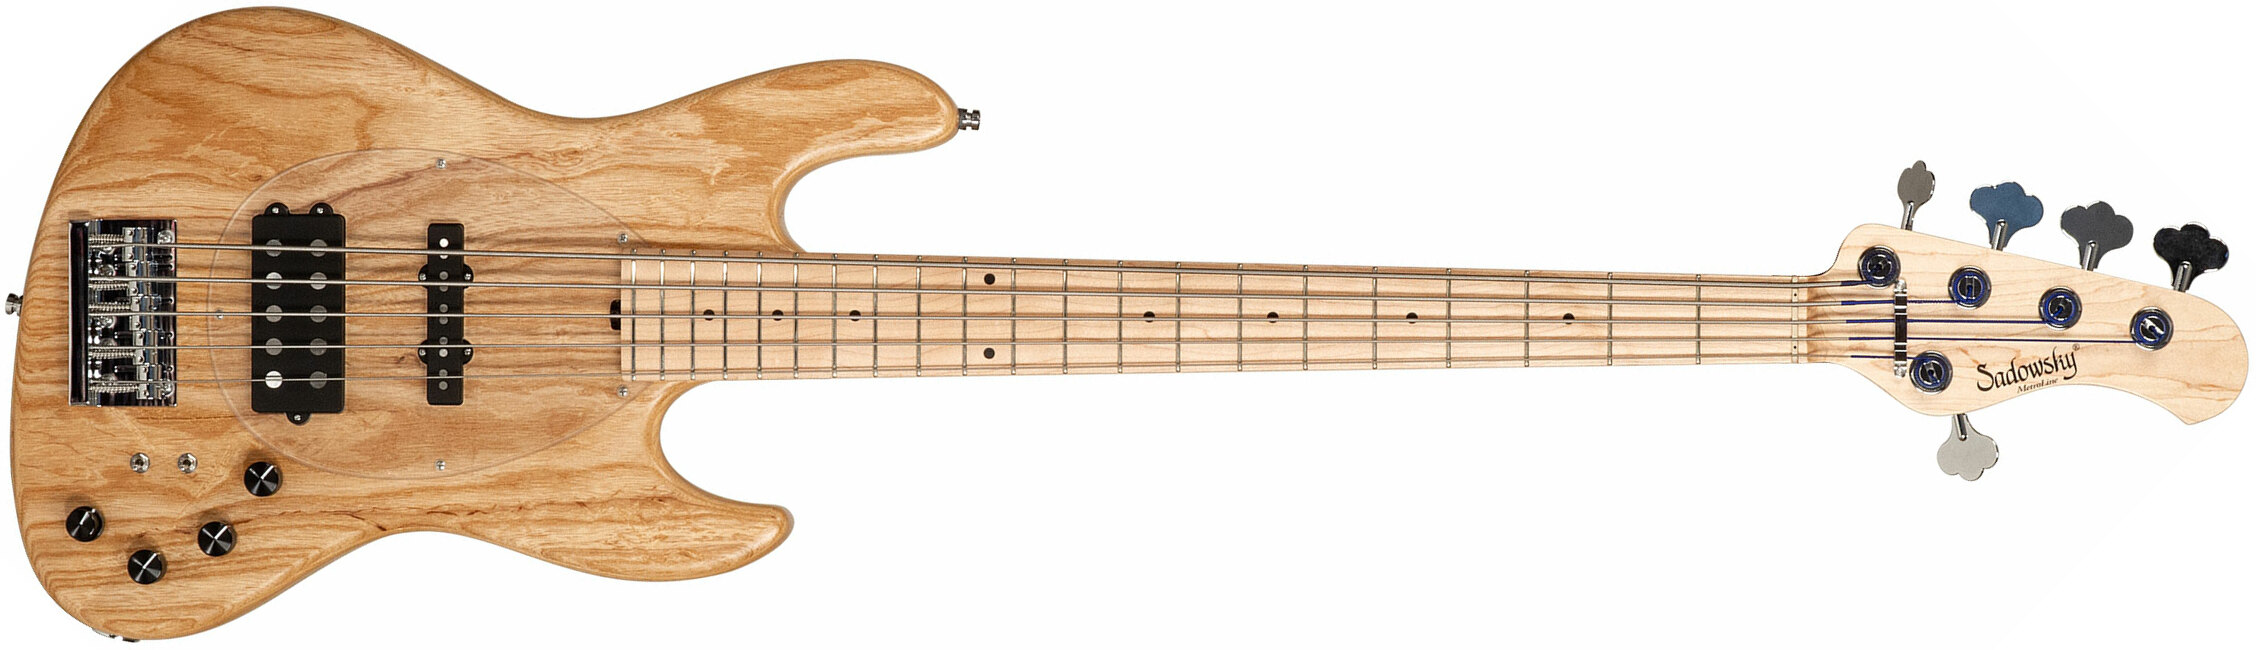 Sadowsky Vintage M/j Bass 21f Ash 5c Metroline All Active Mn - Natural Satin - Solid body electric bass - Main picture